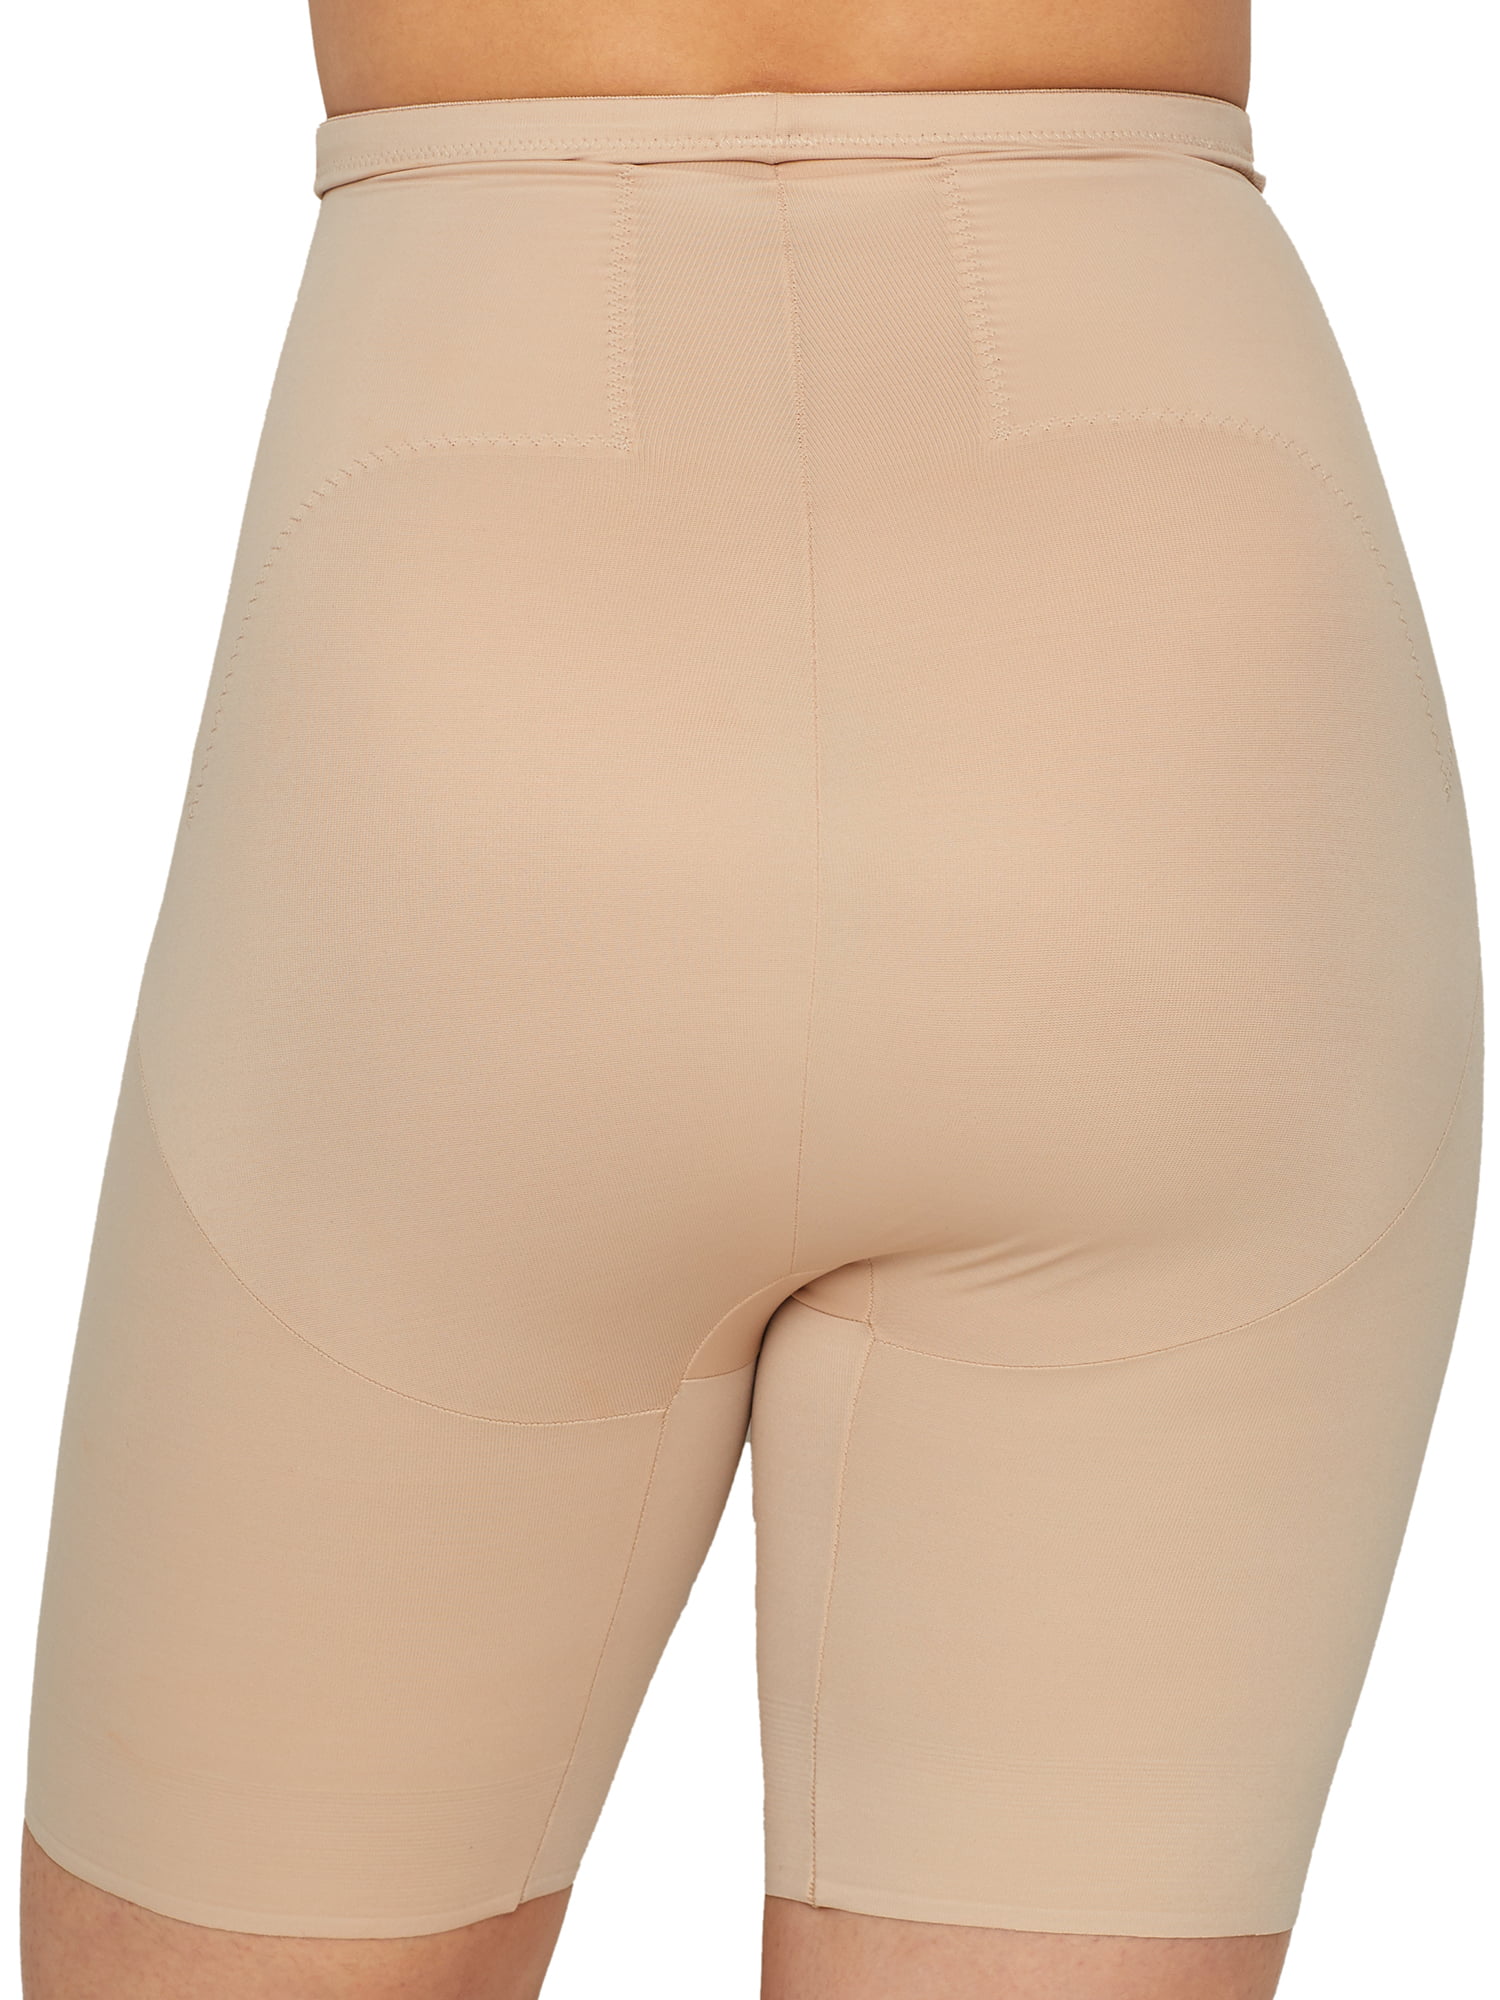 Miraclesuit Womens Plus Flexible Fit Firm Control Thigh Slimmer Style-2939 Walmart.com